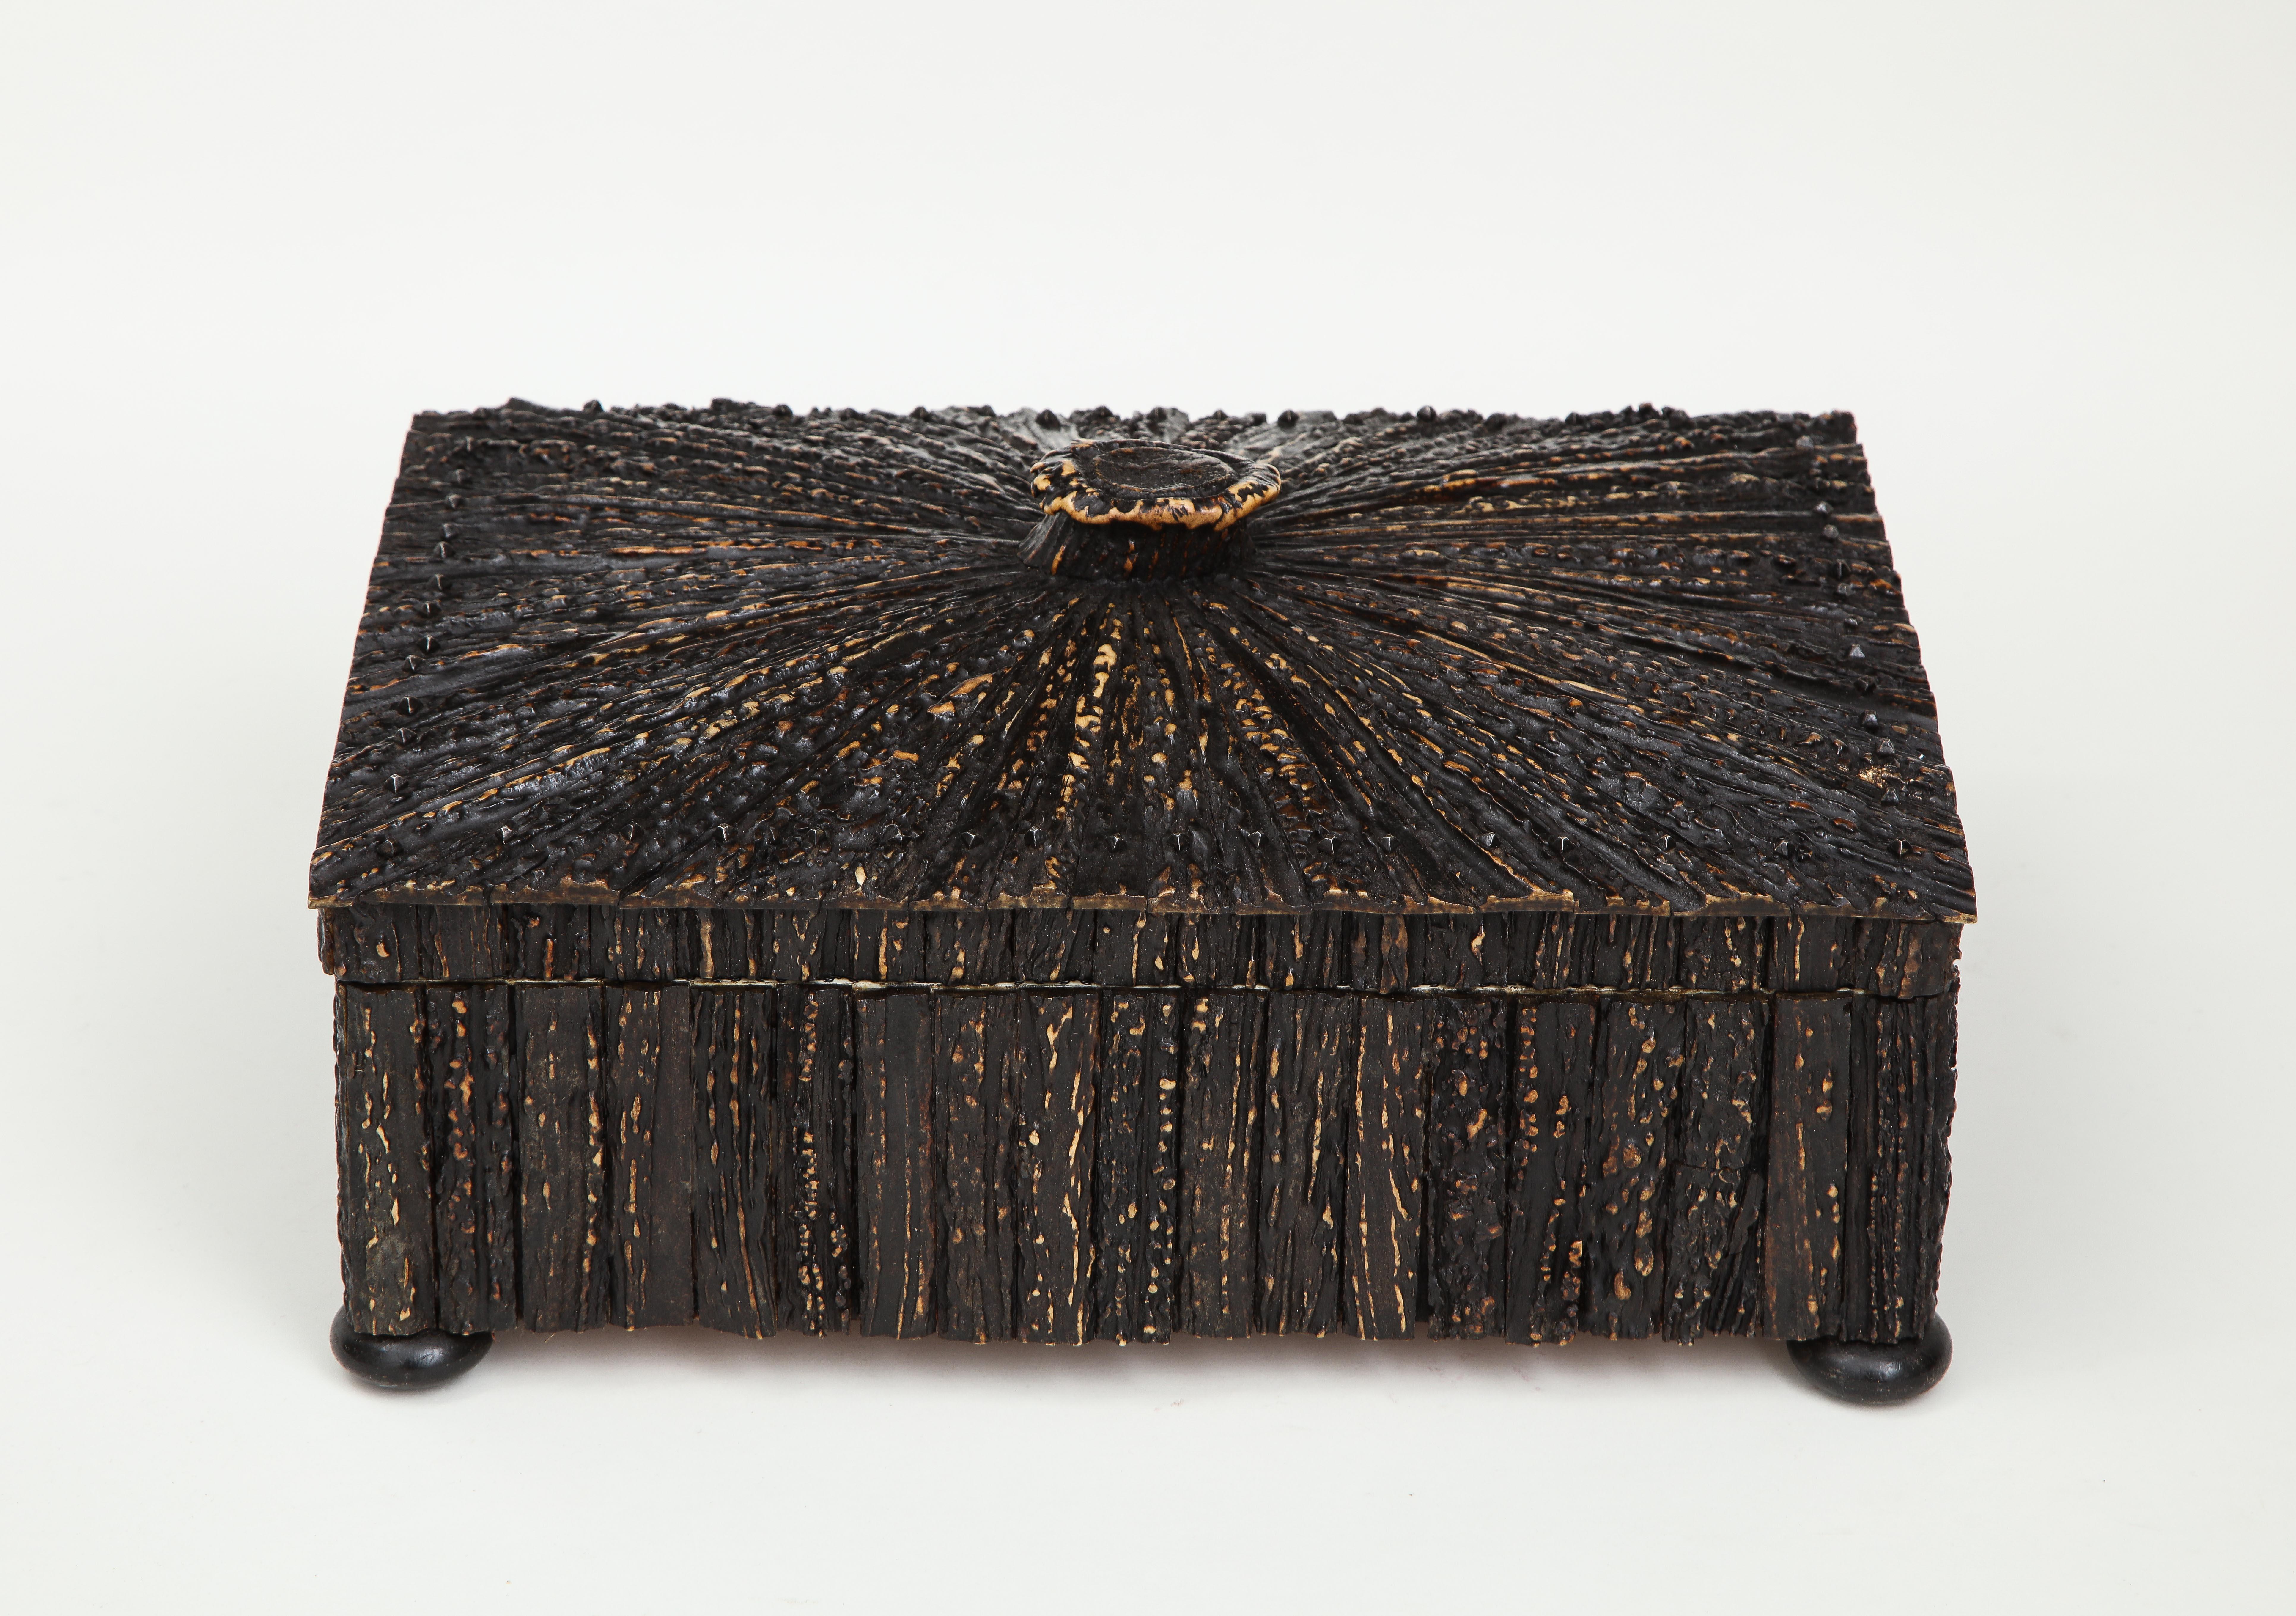 The sandalwood box veneered with antler (note that back is ebonized); opening to a green velvet-lined interior.